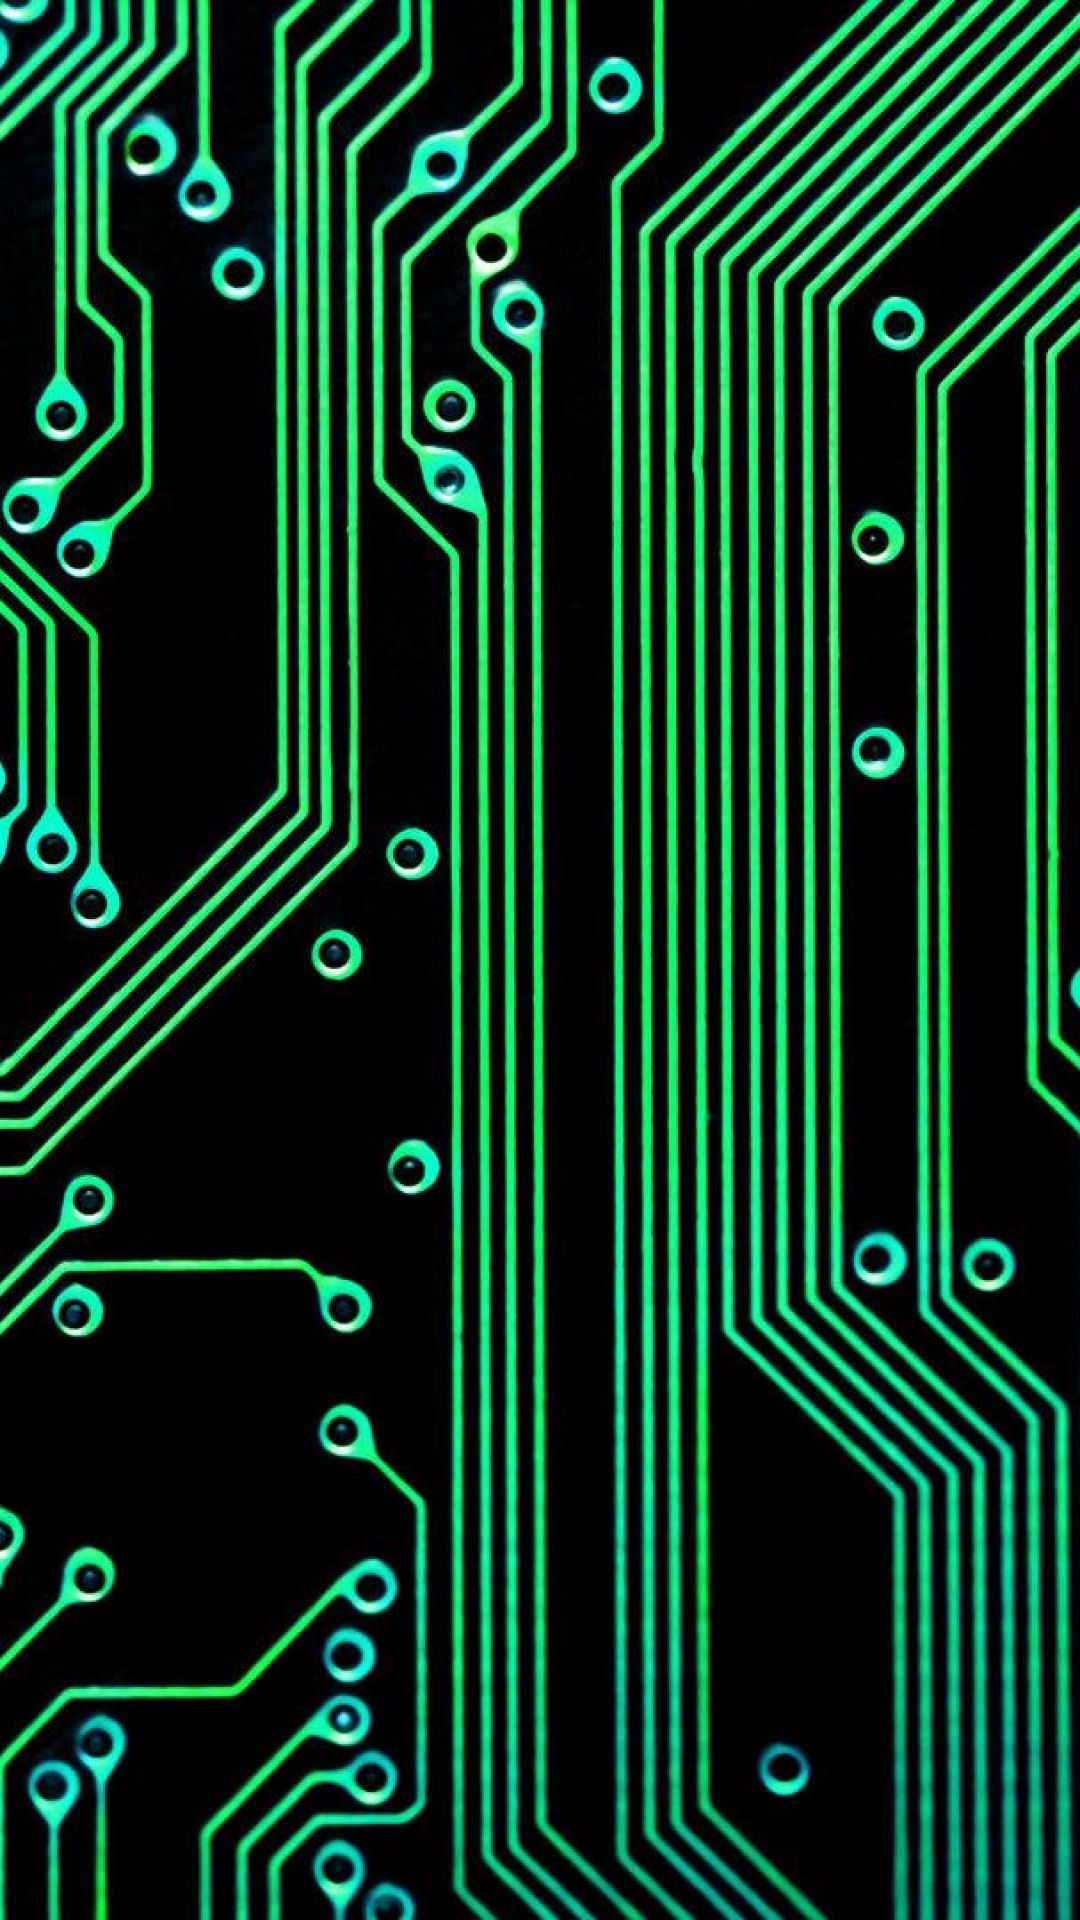 Green Electronic Circuits wallpaper. iOS wallpaper and Android wallpaper